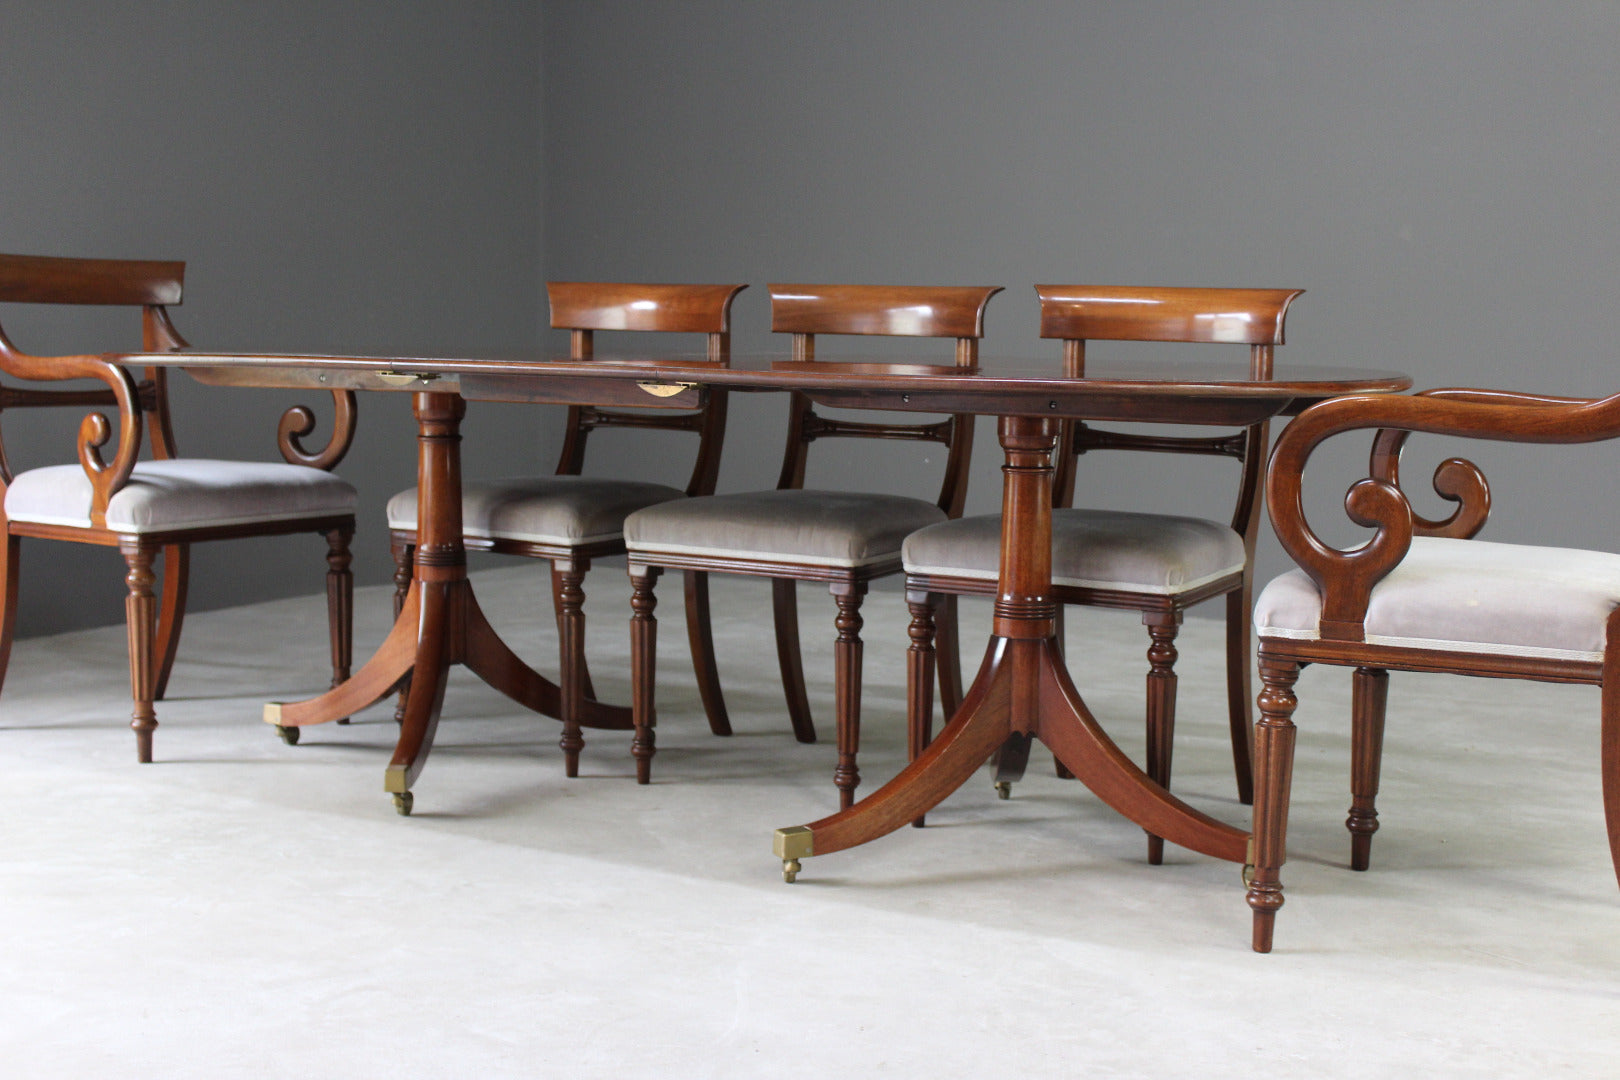 Large Reproduction Mahogany Dining Table - Kernow Furniture